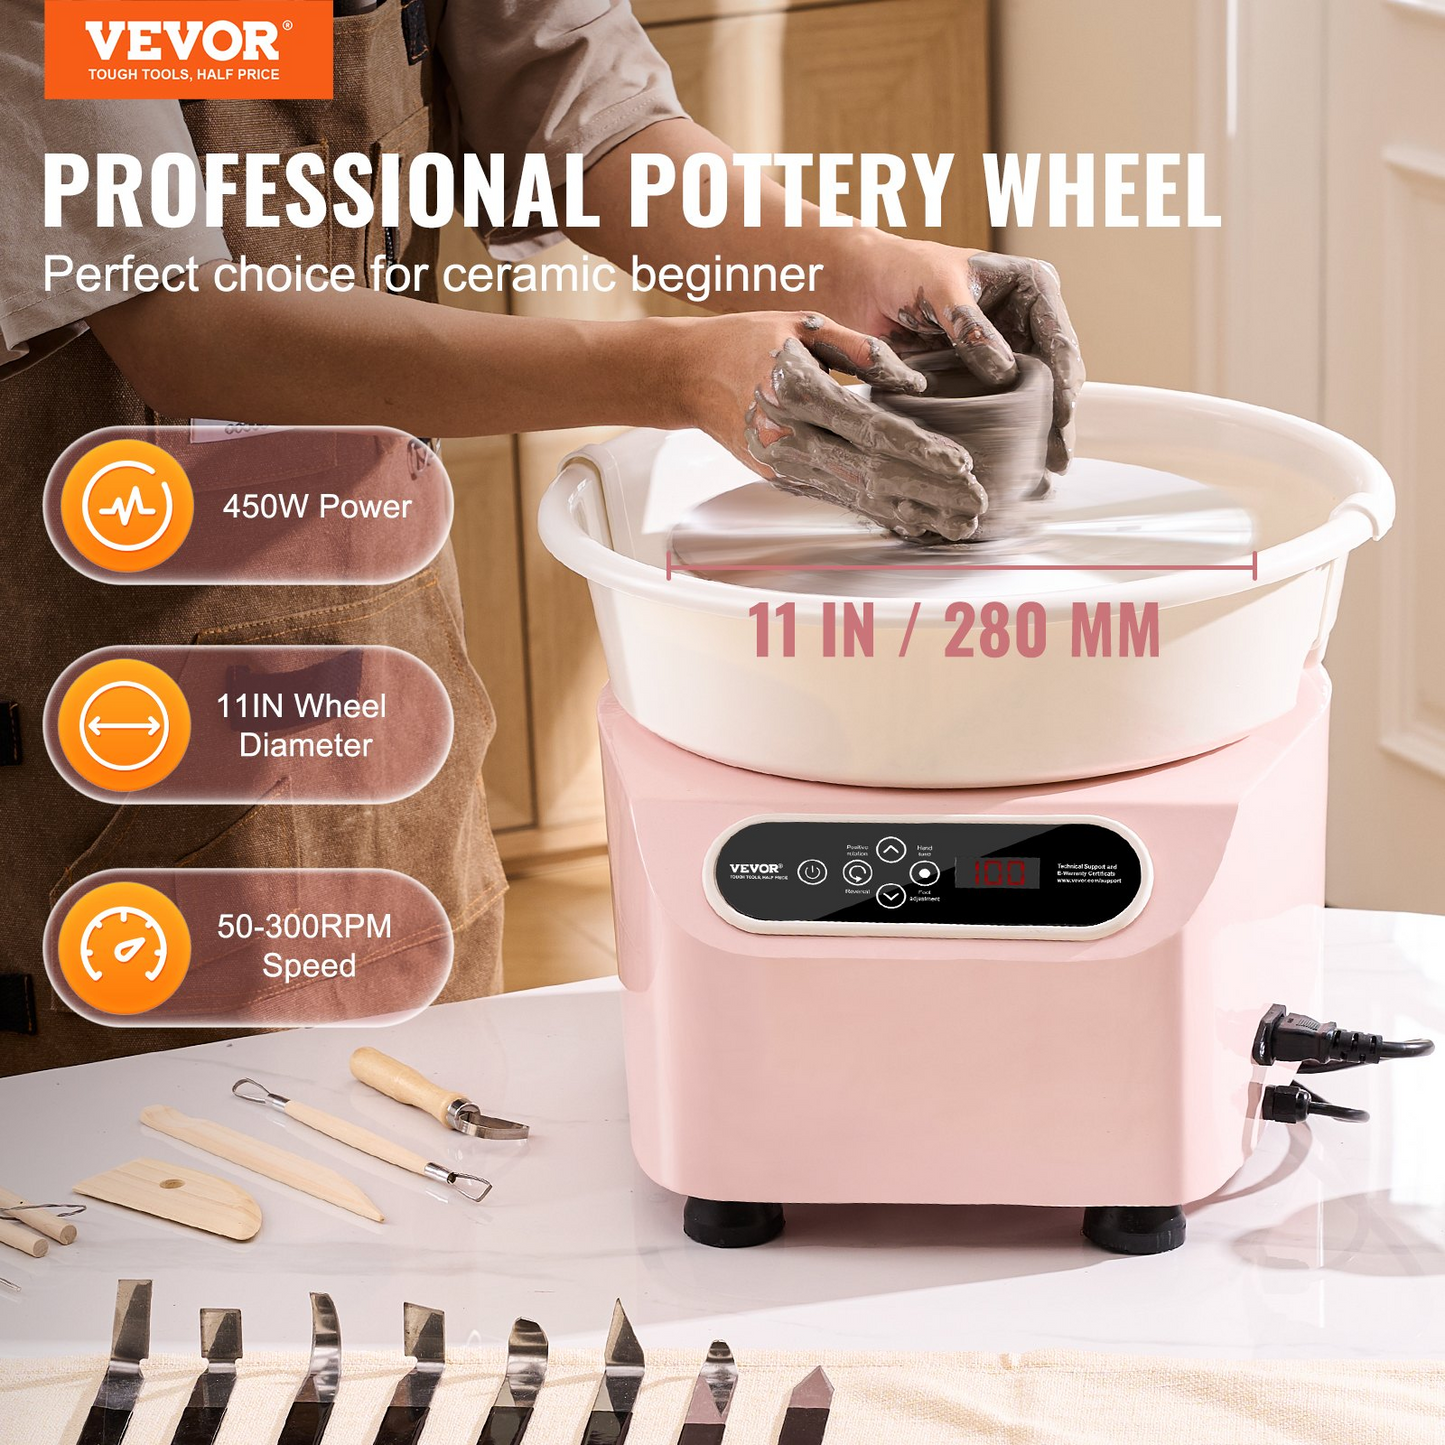 VEVOR Pottery Wheel, 11 inch Pottery Forming Machine, 450W Electric Wheel for Pottery with Foot Pedal and LCD Touch Screen, Direct Drive Ceramic Wheel with Shaping Tools for DIY Art Craft, Pink, Goodies N Stuff